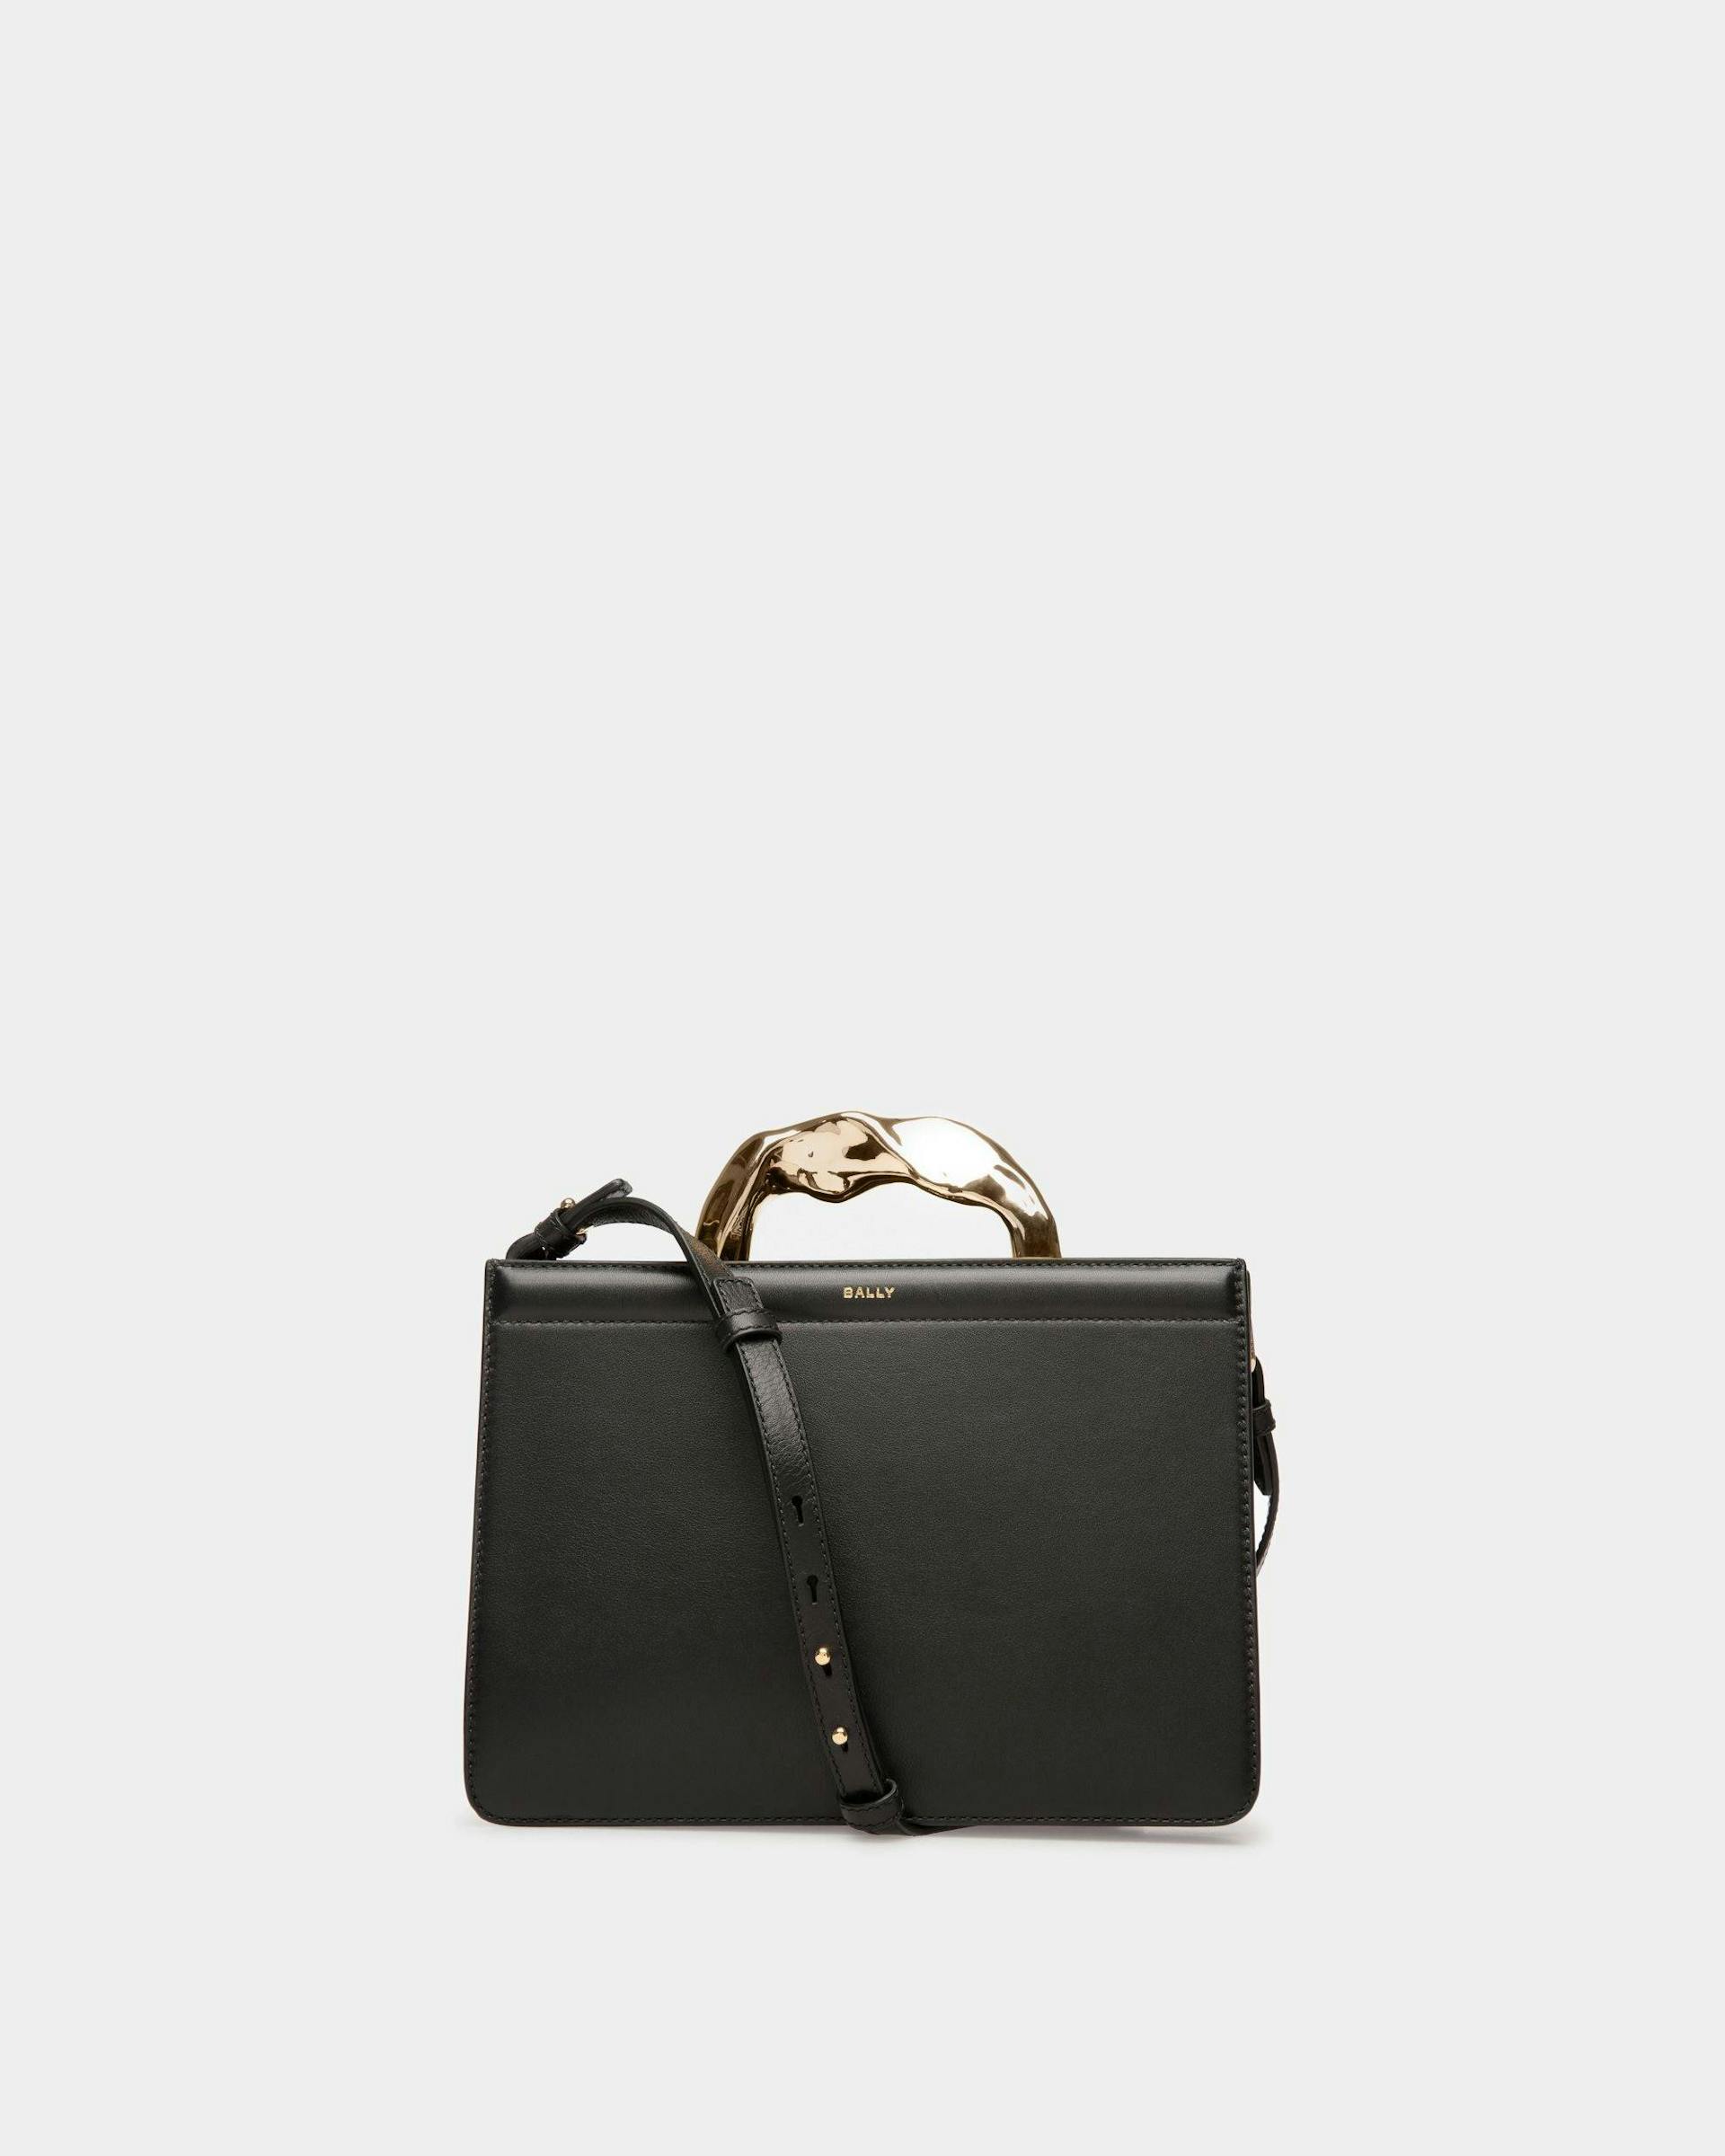 Women's Baroque Top Handle Bag In Black Leather | Bally | Still Life Front